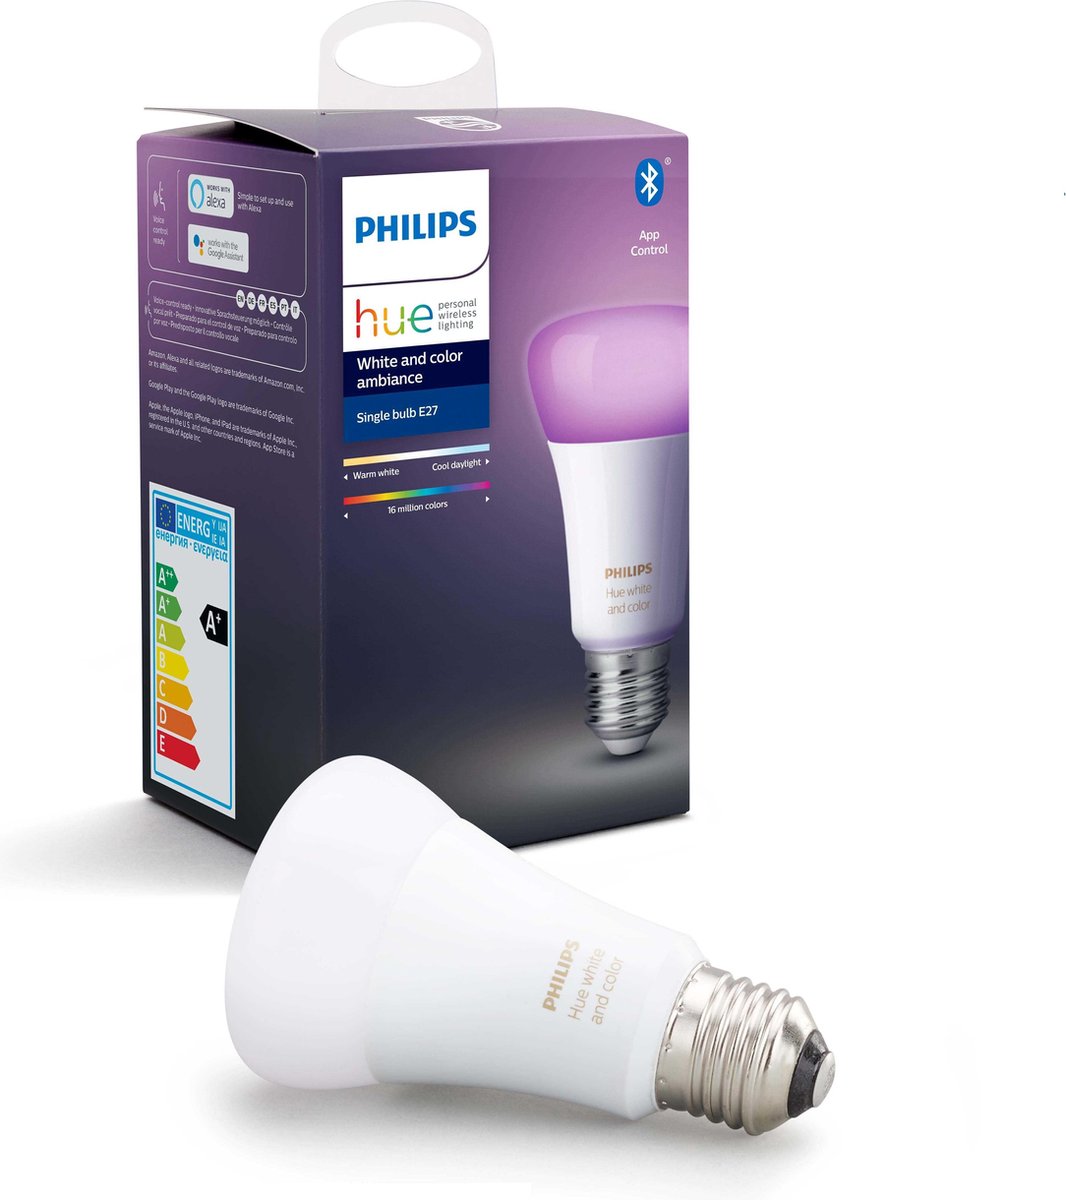 Philips Hue Slimme Lichtbron E27 - White and Color Ambiance - 9W -  Bluetooth | bol.com